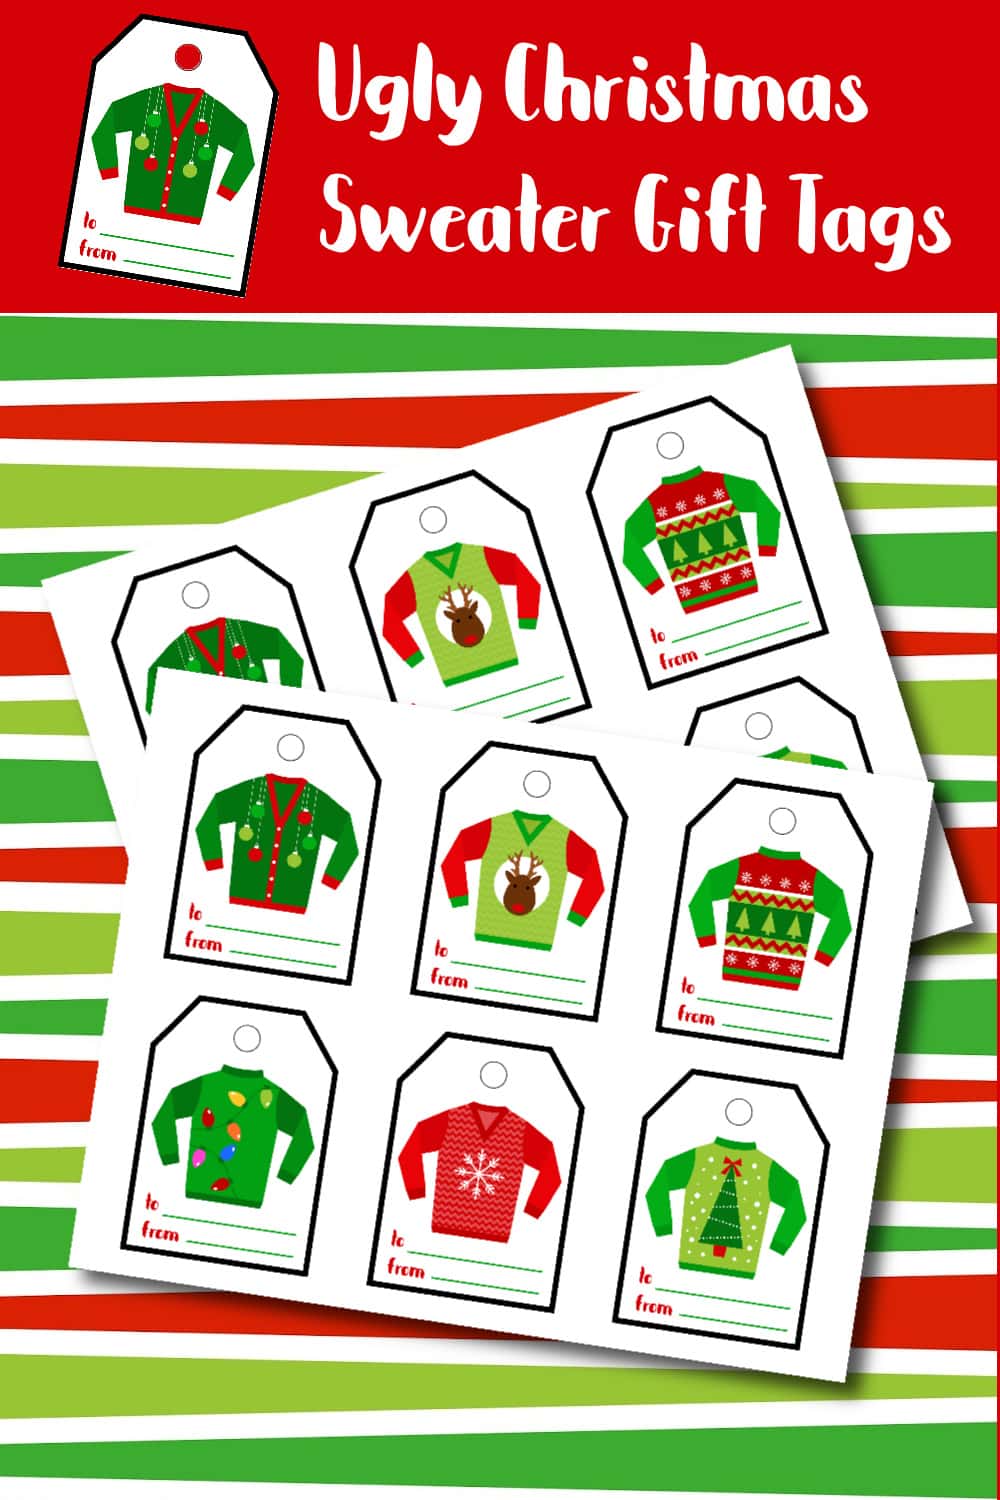 30 UGLY SWEATER CHRISTMAS ENVELOPE SEALS LABELS STICKERS PARTY FAVORS 1.5" ROUND 